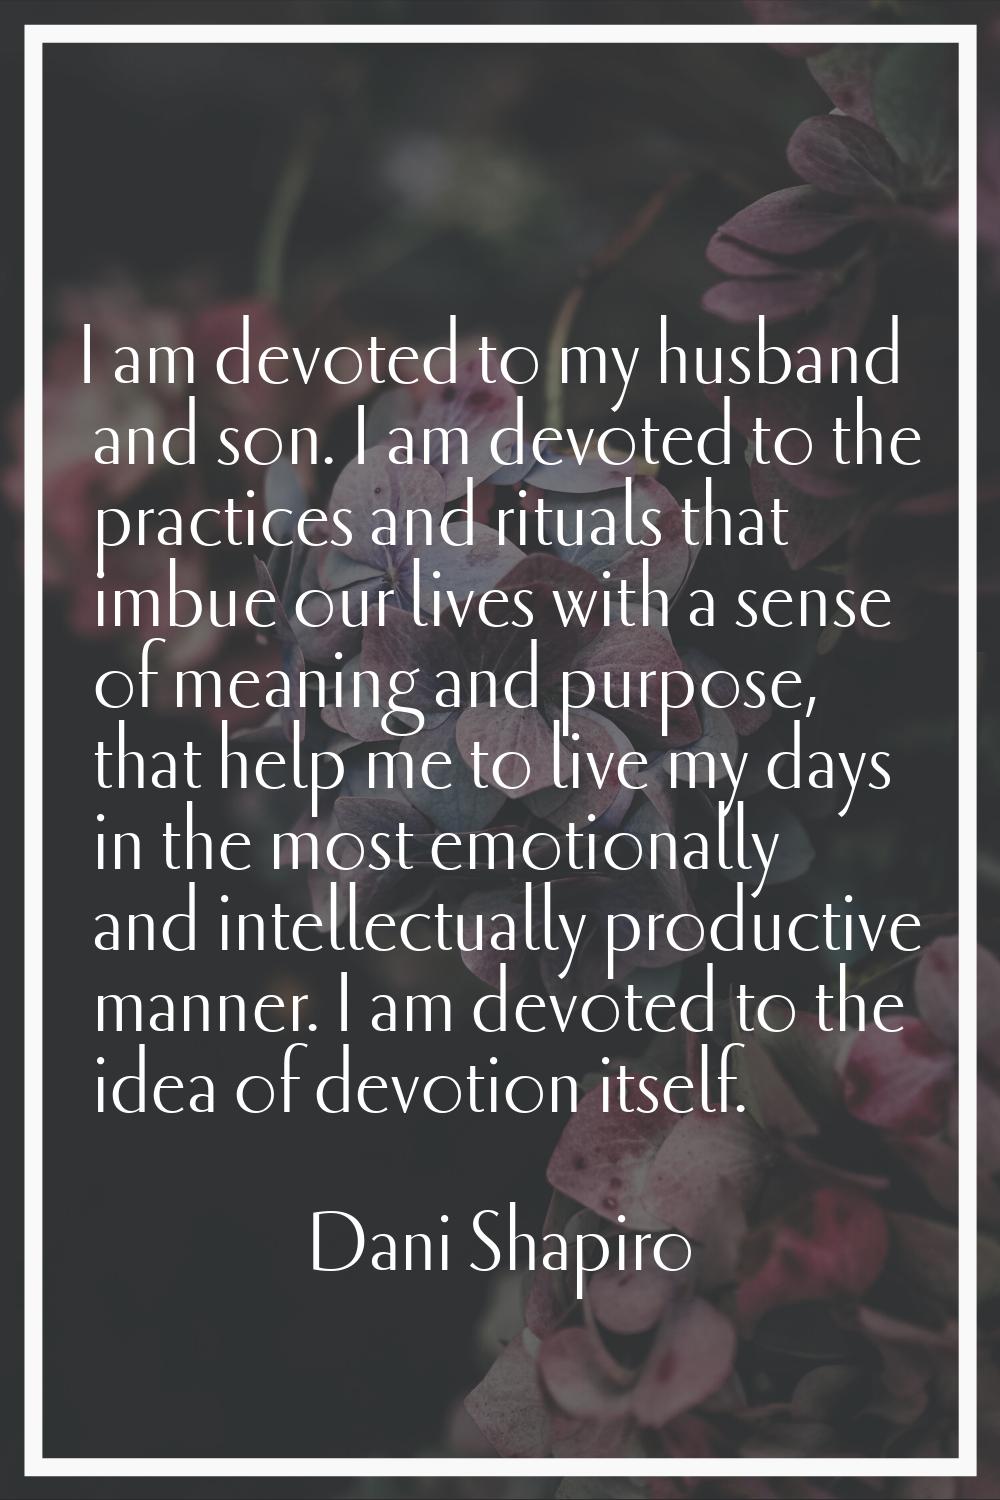 I am devoted to my husband and son. I am devoted to the practices and rituals that imbue our lives 